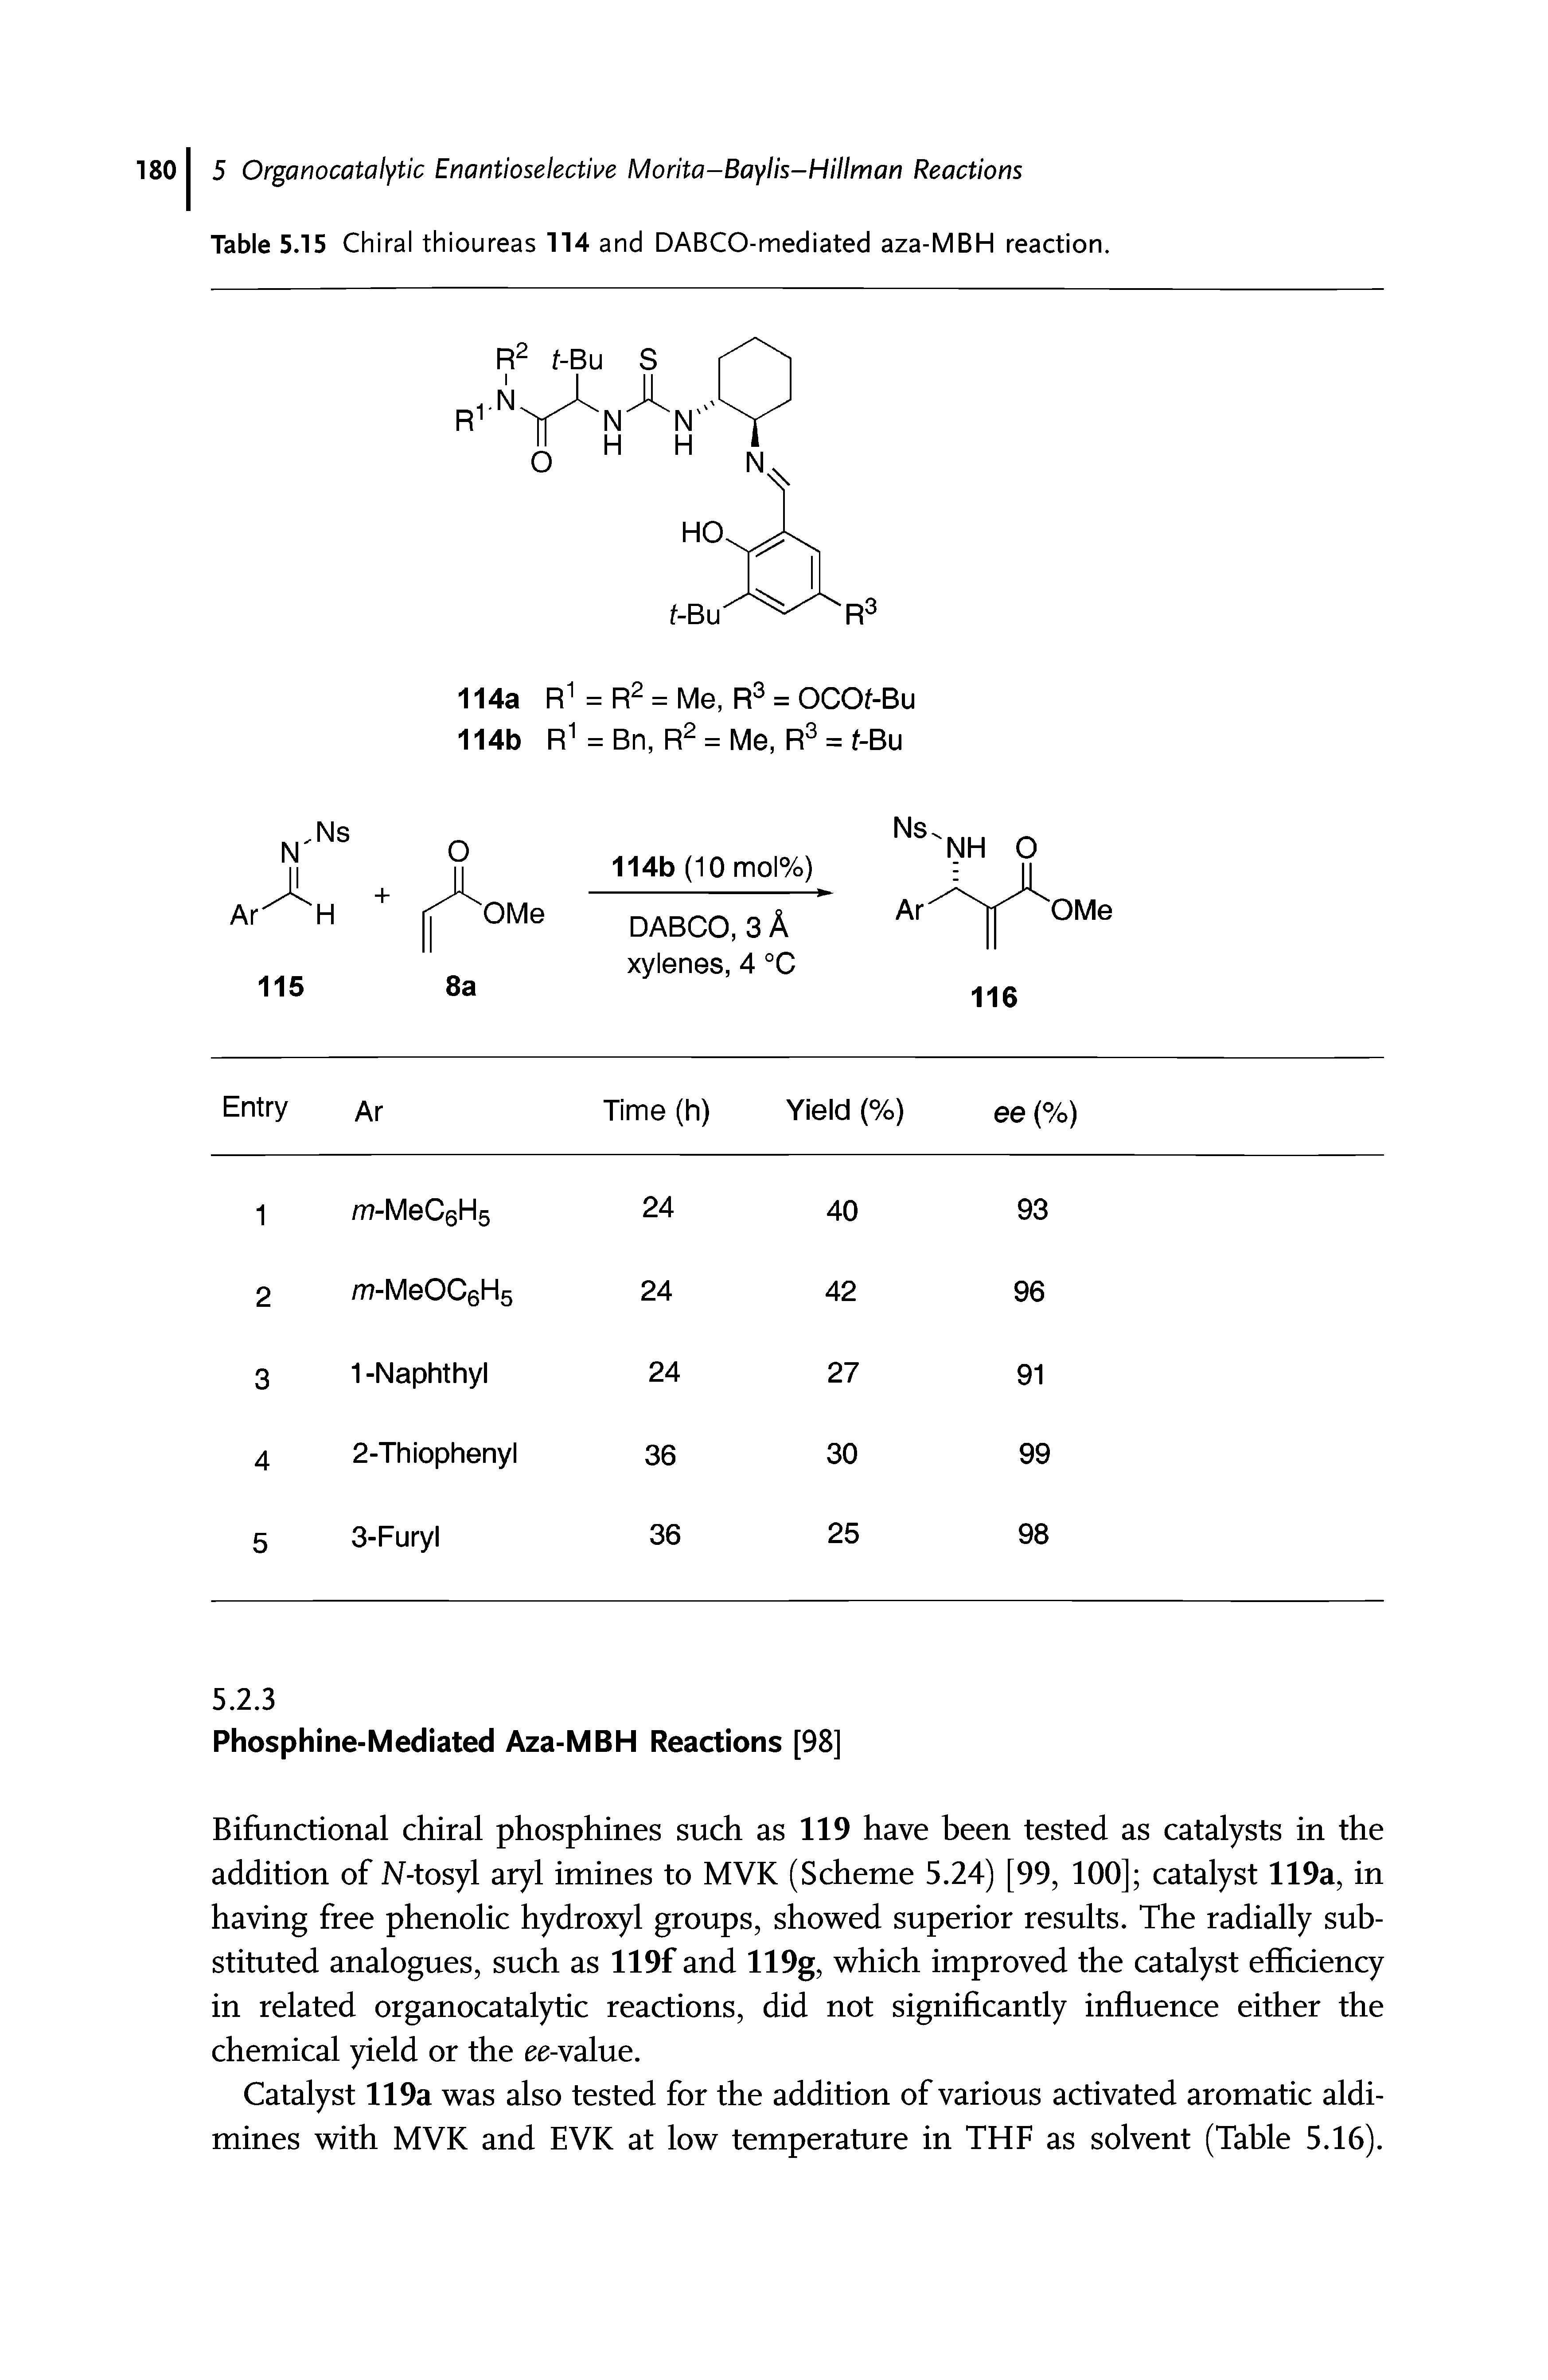 Table 5.15 Chiral thioureas 114 and DABCO-mediated aza-MBH reaction.